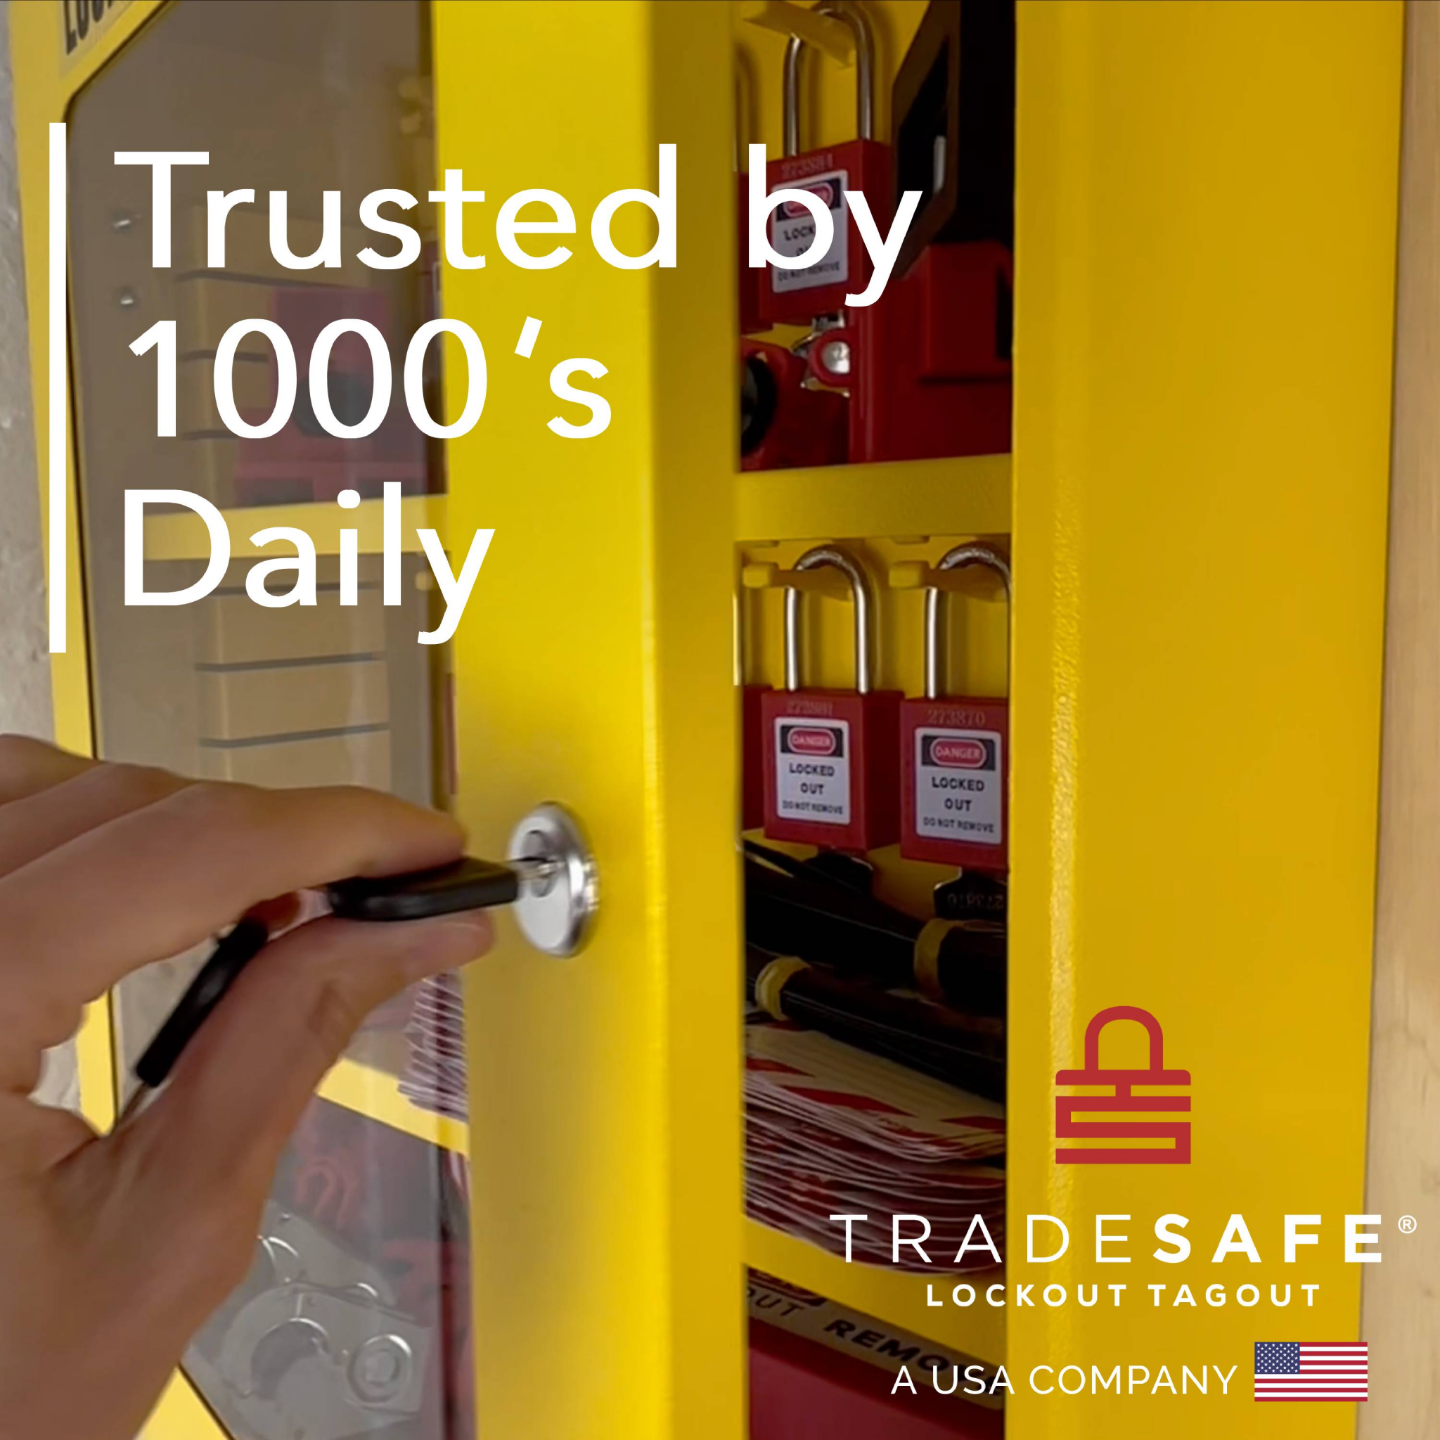 tradesafe lockout tagout steel cabinet, trusted by 1000's daily